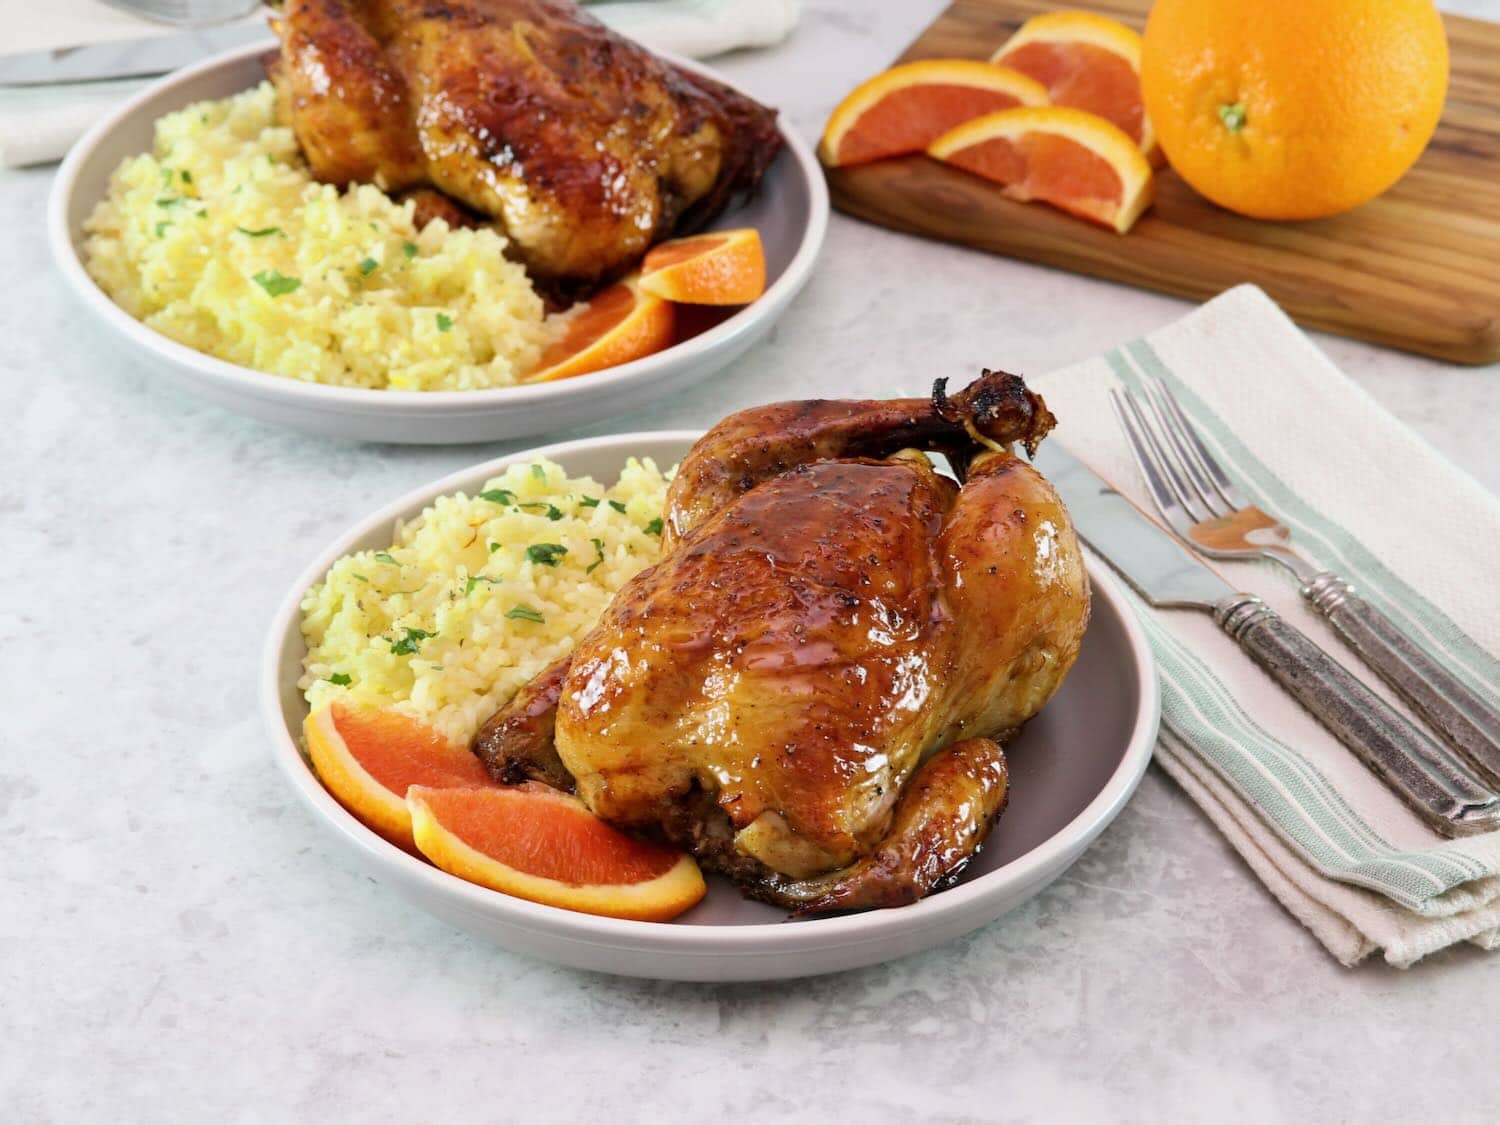 Horizontal shot of a plate containing a citrus marinated game hen on a bed of rice, garnished with fresh orange slices. Another plate of the same food sits in the background next to orange slices on a wooden cutting board.